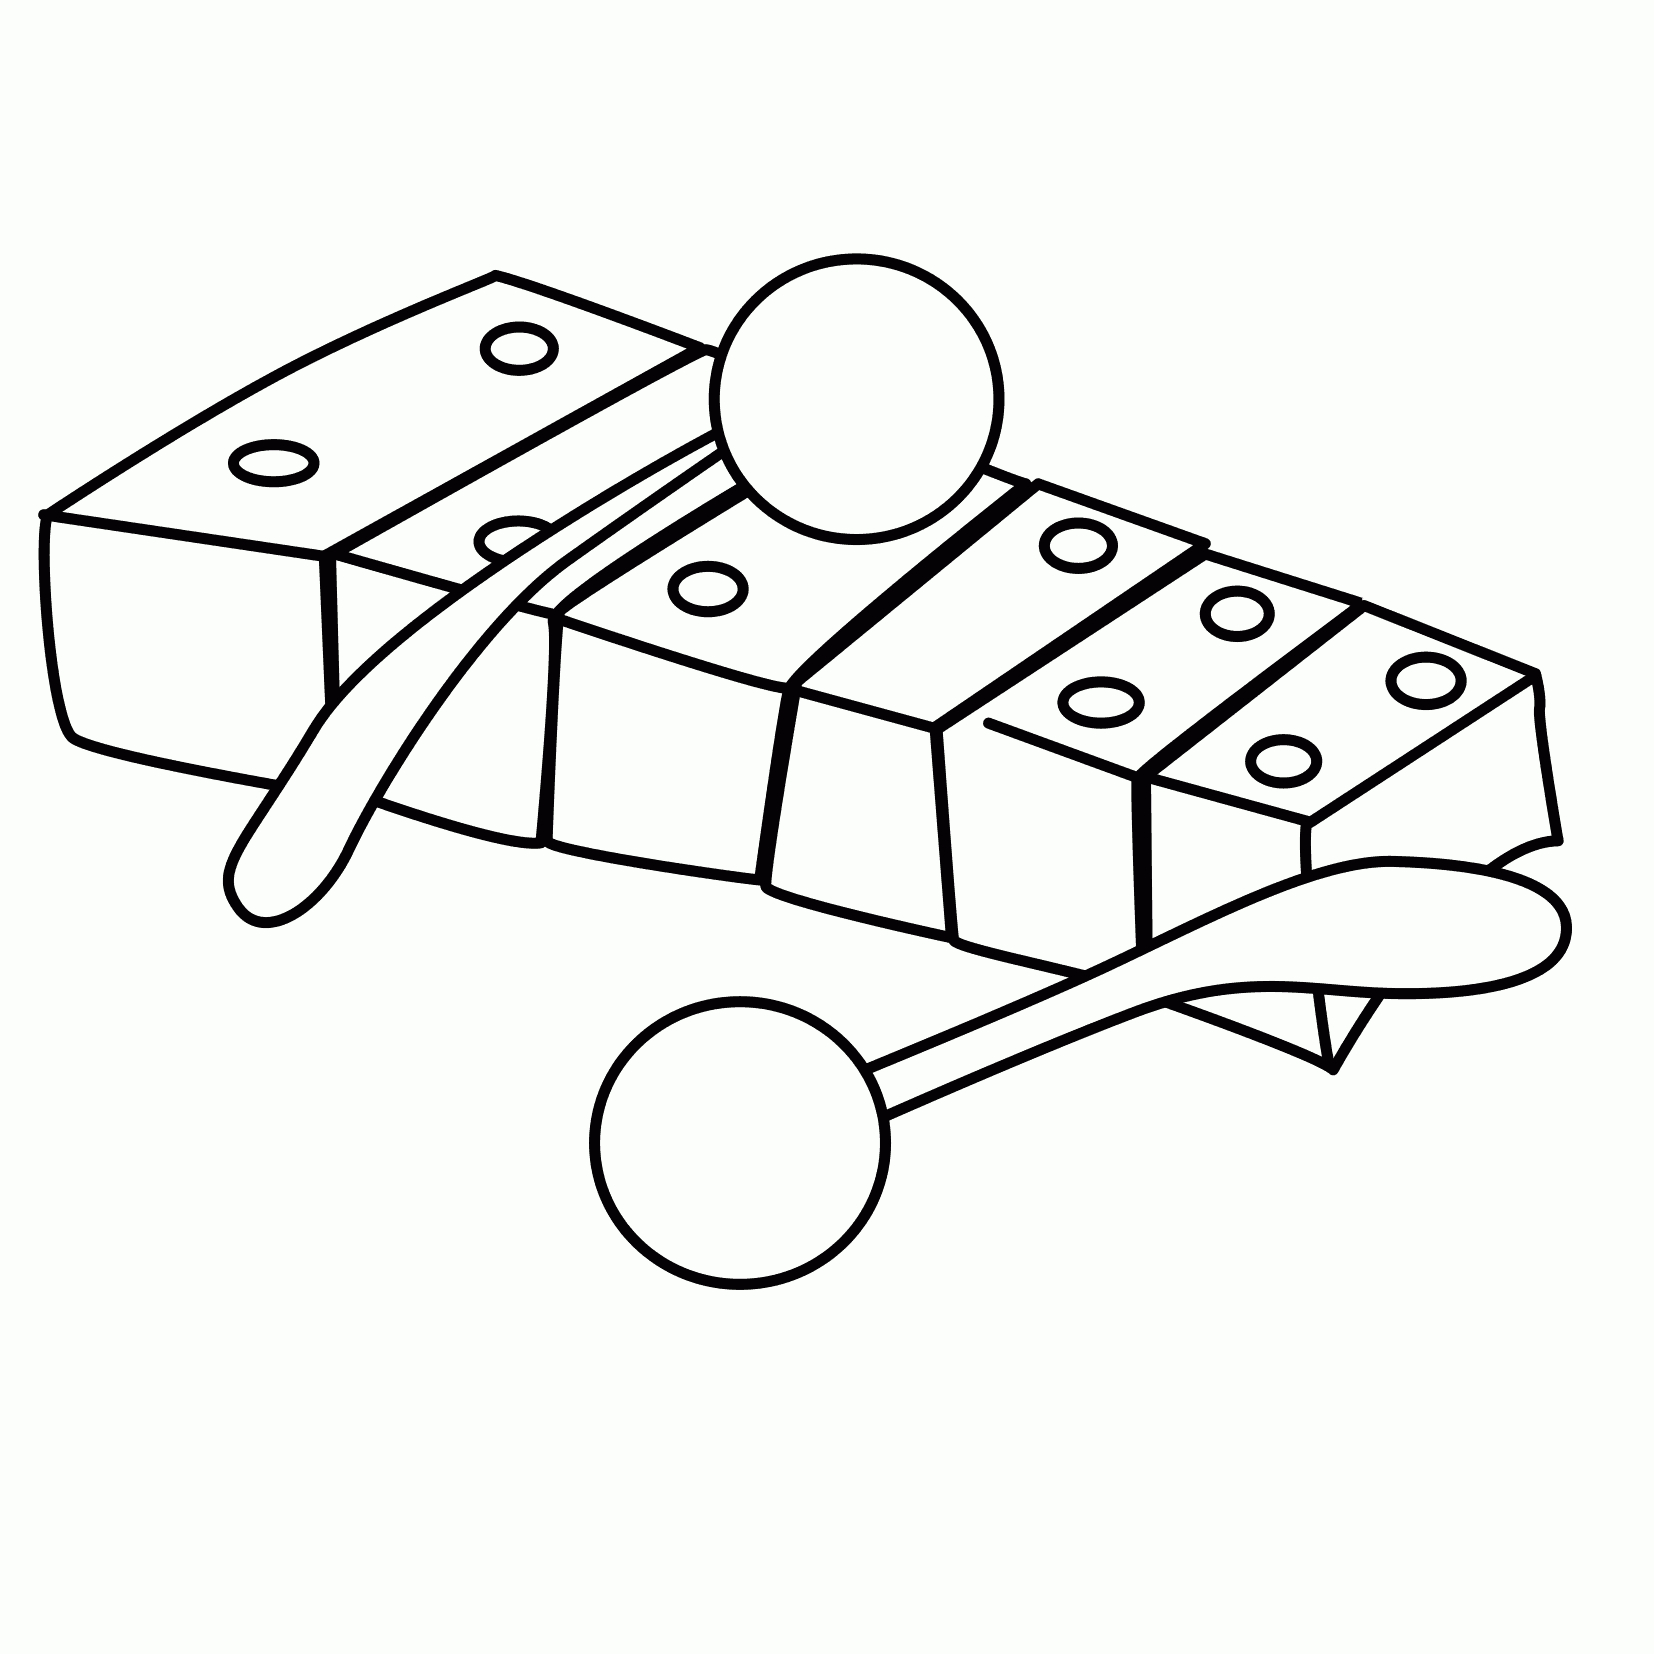 Xylophone Coloring Sheet Coloring Pages destiné Coloriage Xylophone